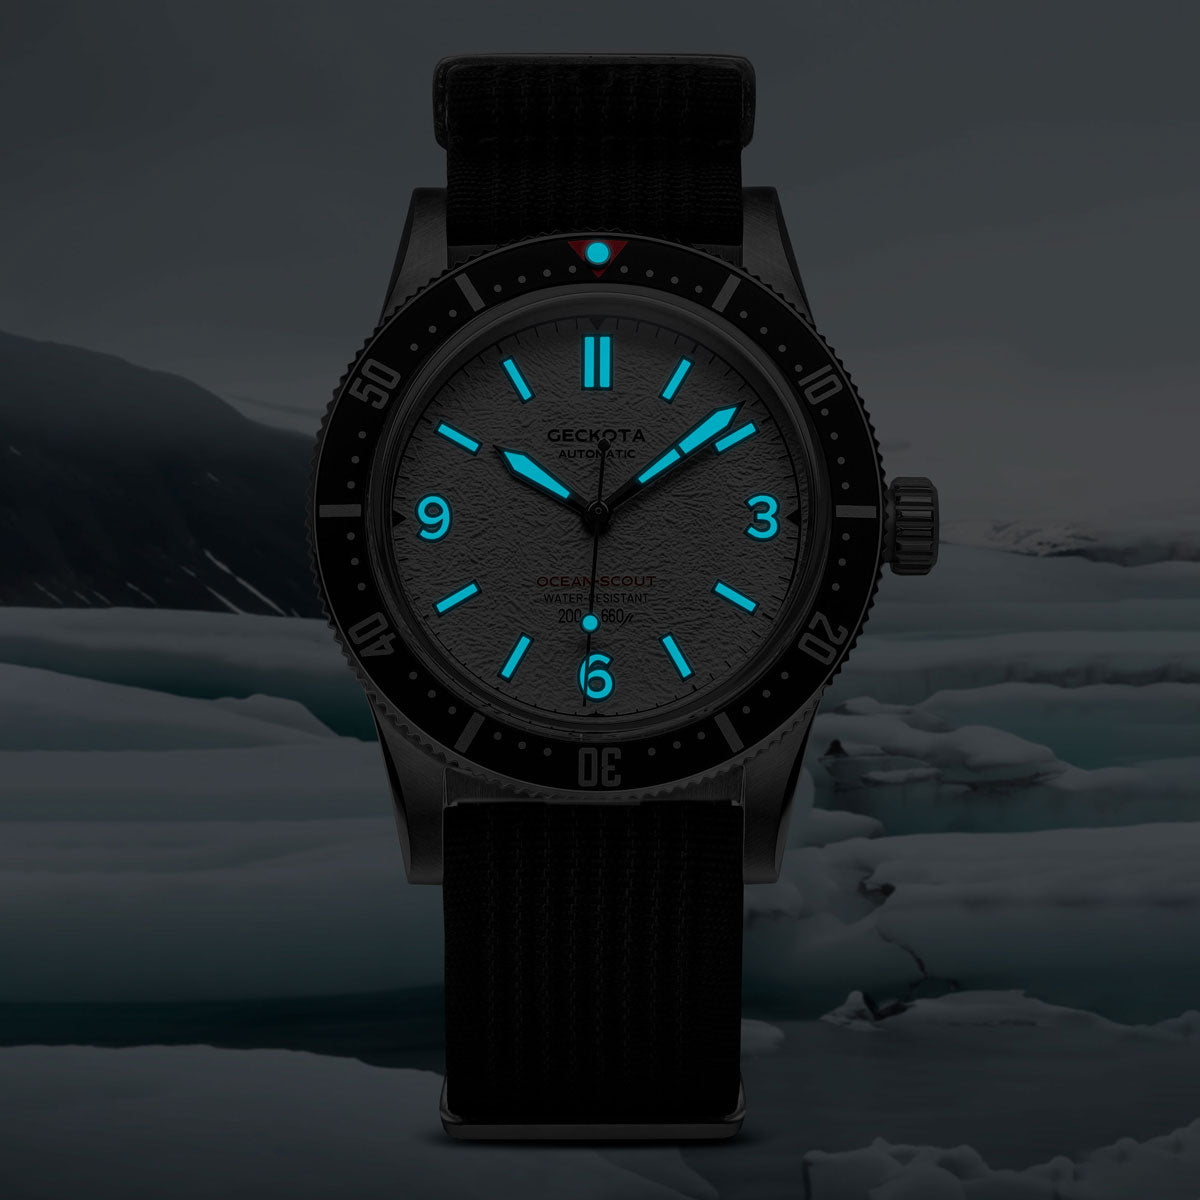 Geckota Ocean-Scout Dive Watch - Ice White - Black Nylon Strap - additional image 3